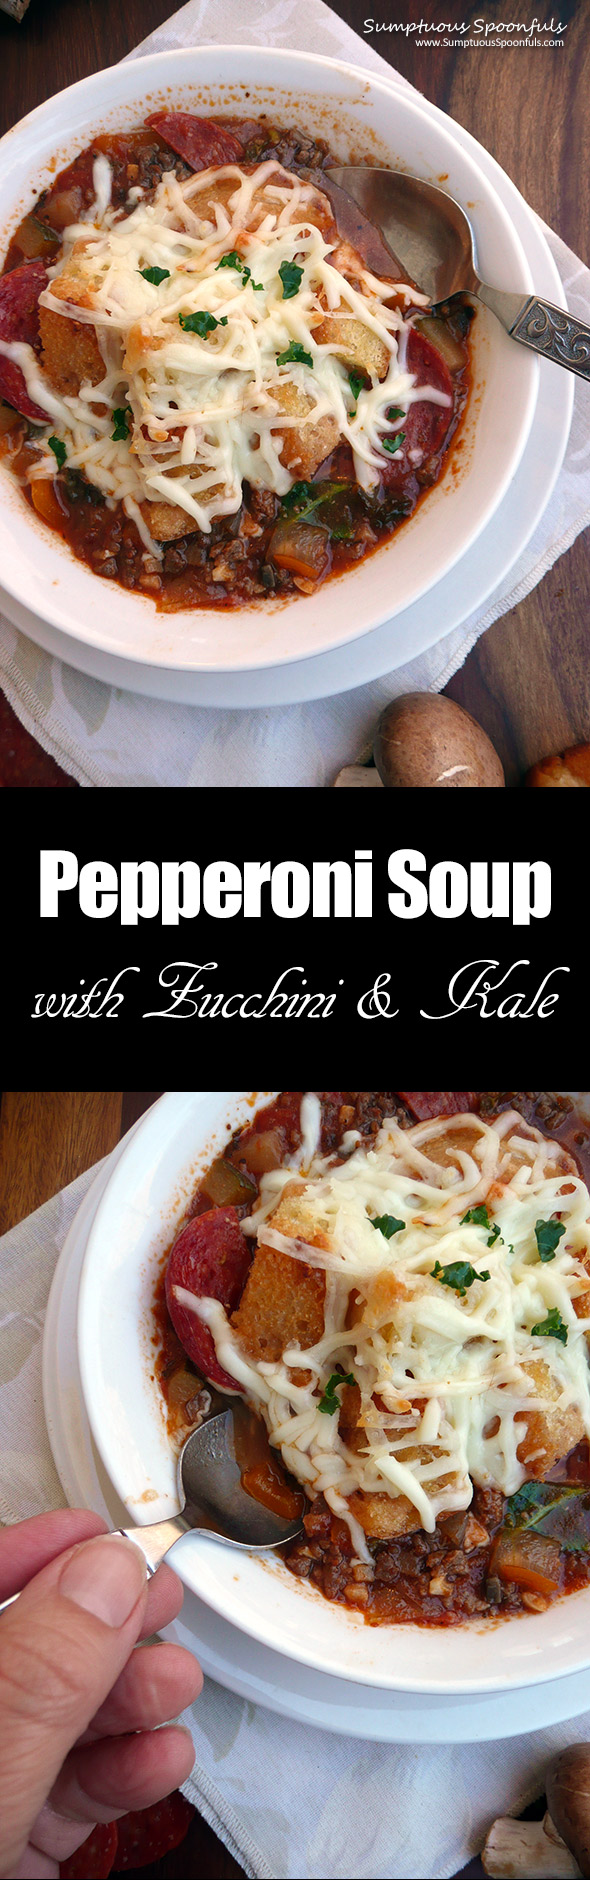 Pepperoni Soup with Zucchini, Kale & Homemade Croutons ~ Sumptuous Spoonfuls #Pepperoni #Pizza #Soup #recipe